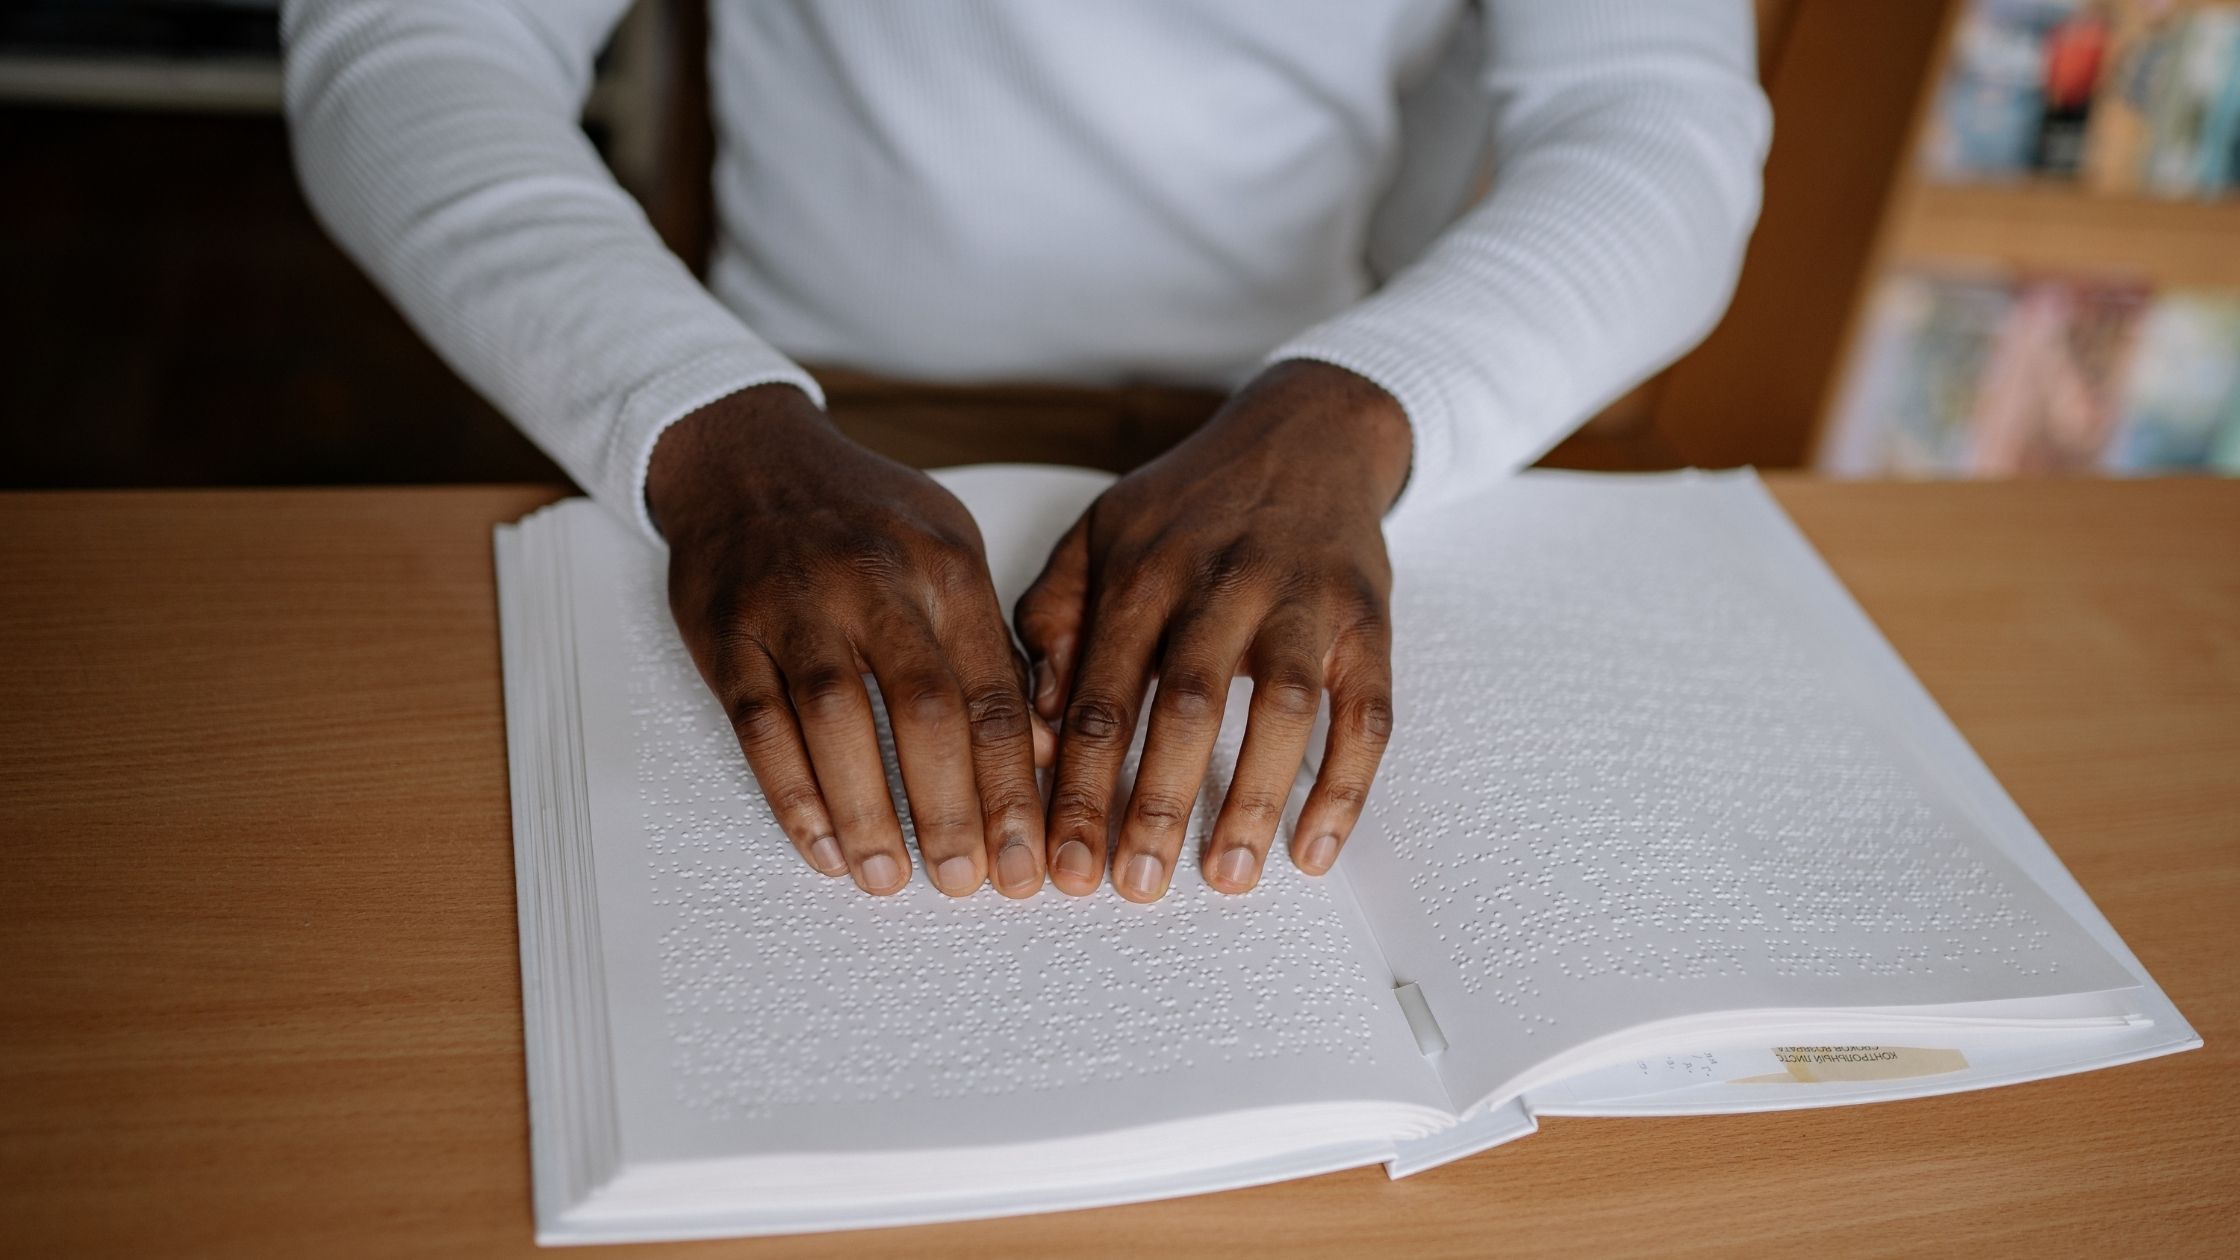 A person reading Braille on a book